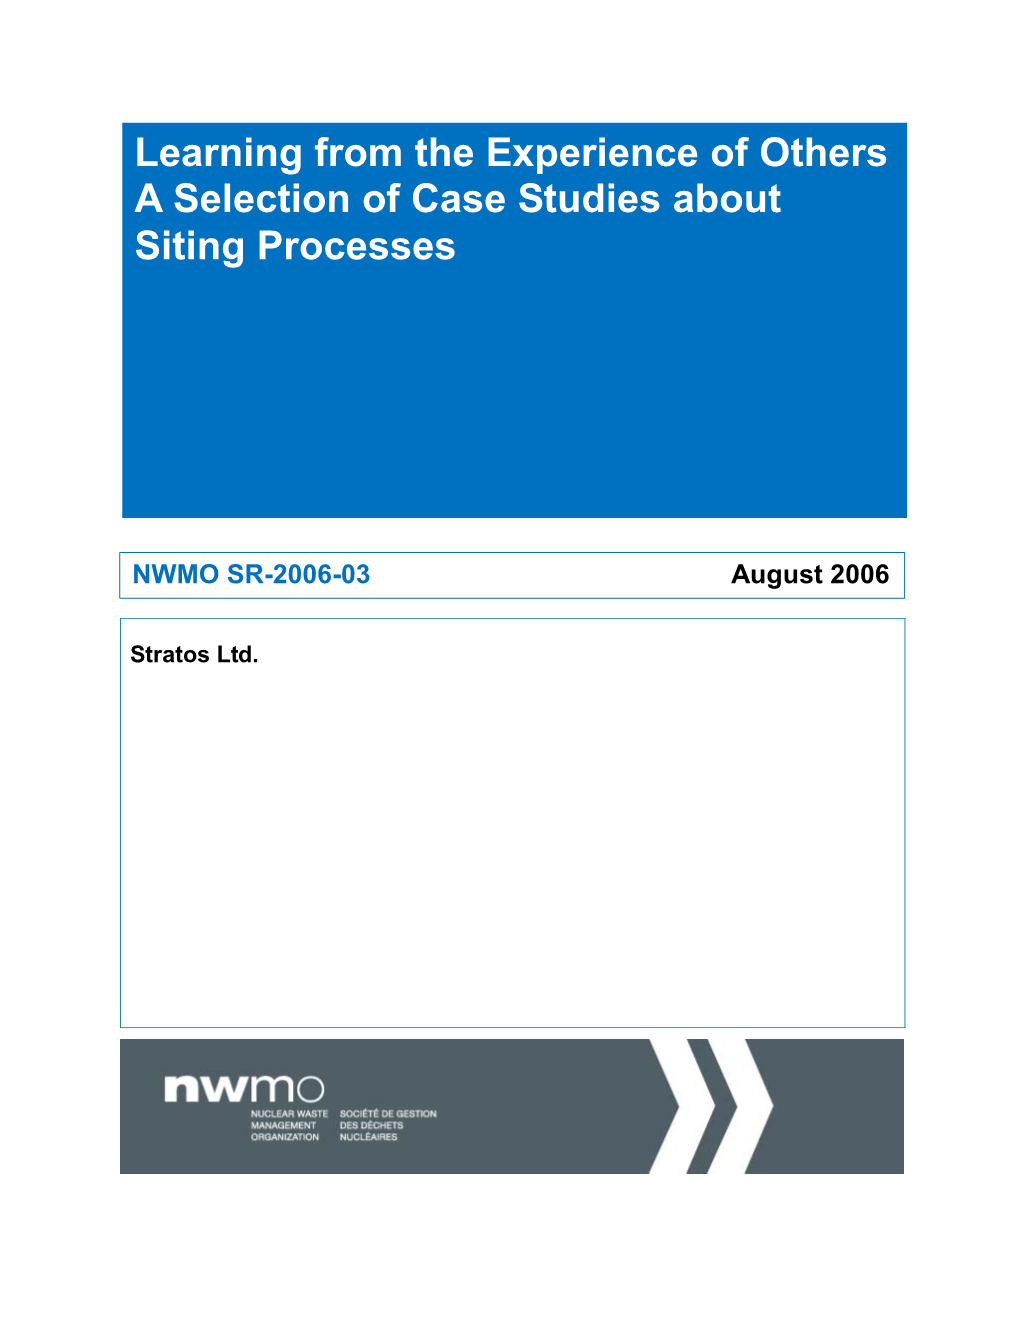 Learning from the Experience of Others a Selection of Case Studies About Siting Processes